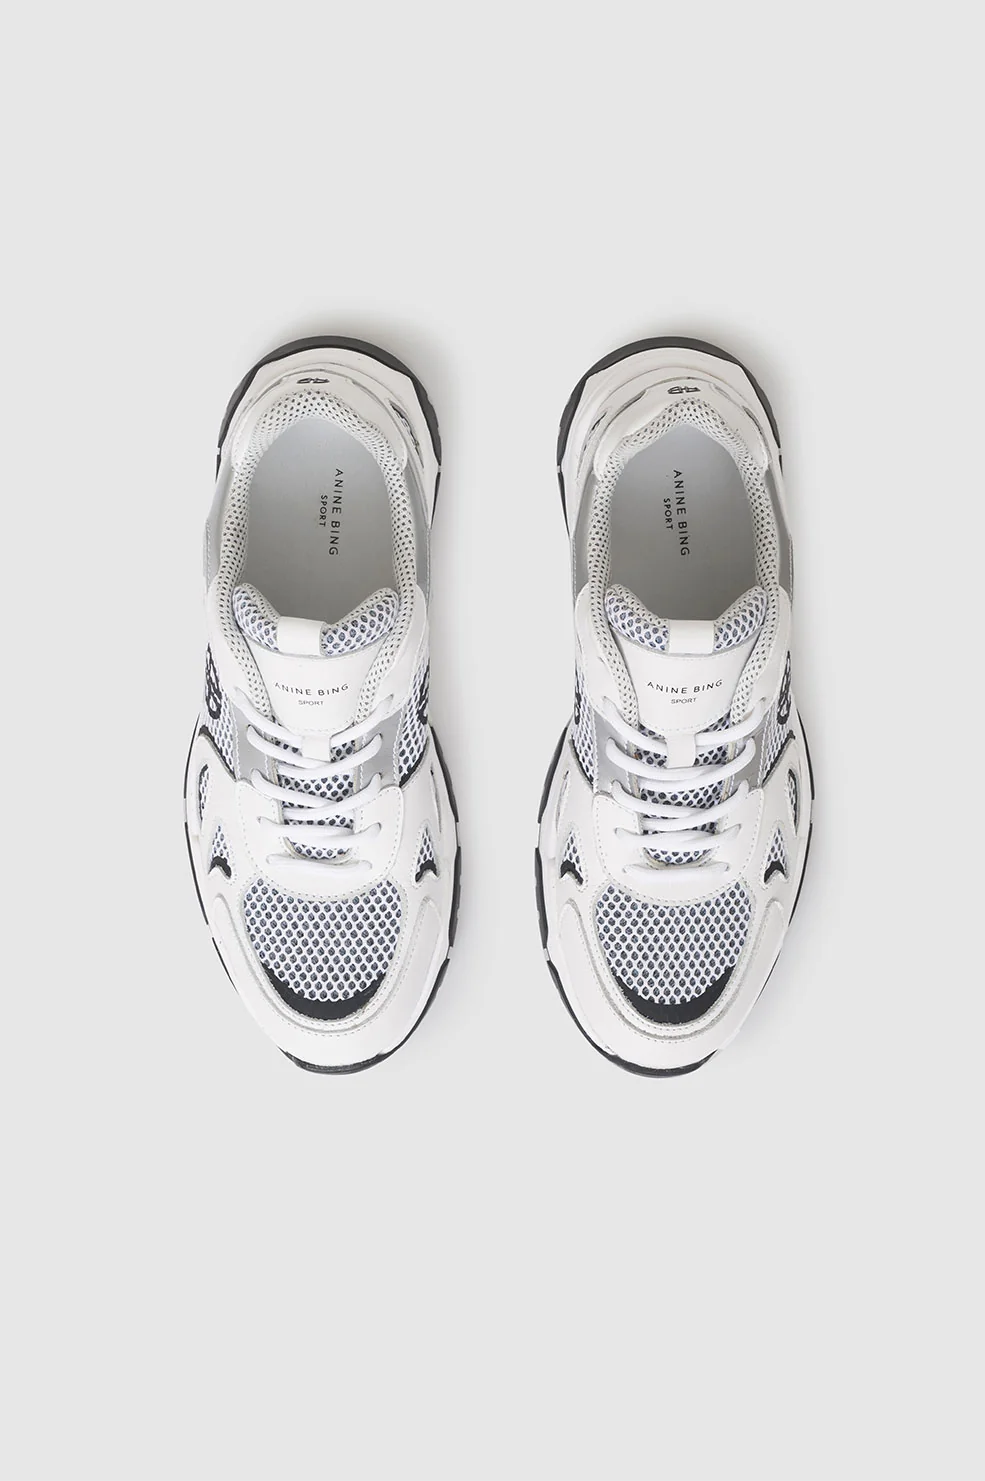 Anine Bing - Brody Sneakers in White